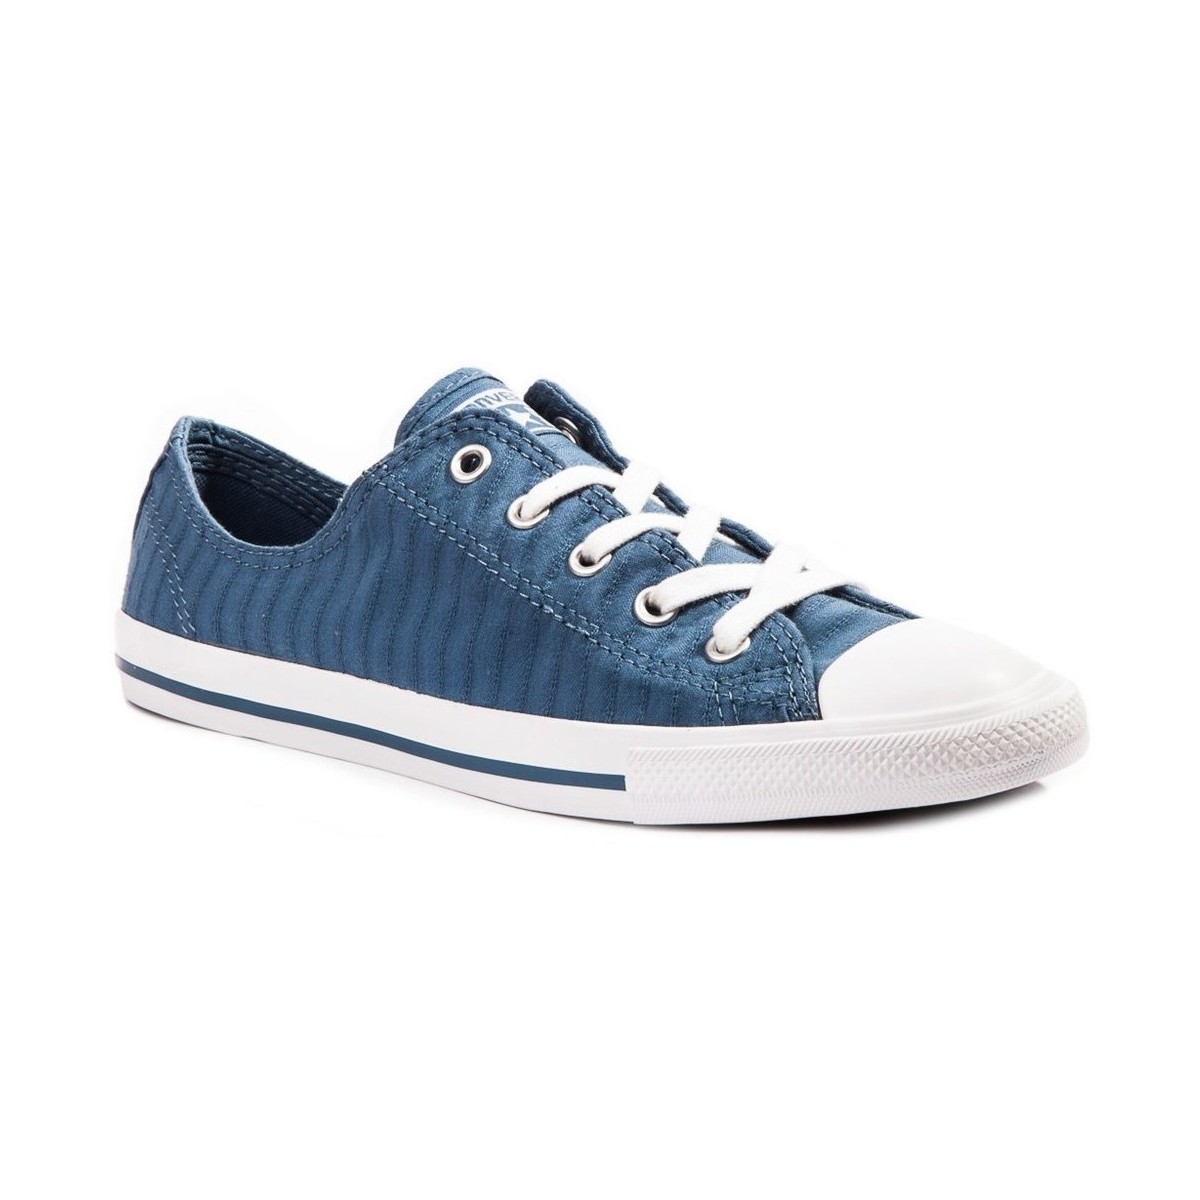 Sko Dame Lave sneakers Converse Chuck Taylor All Star Dainty Blå